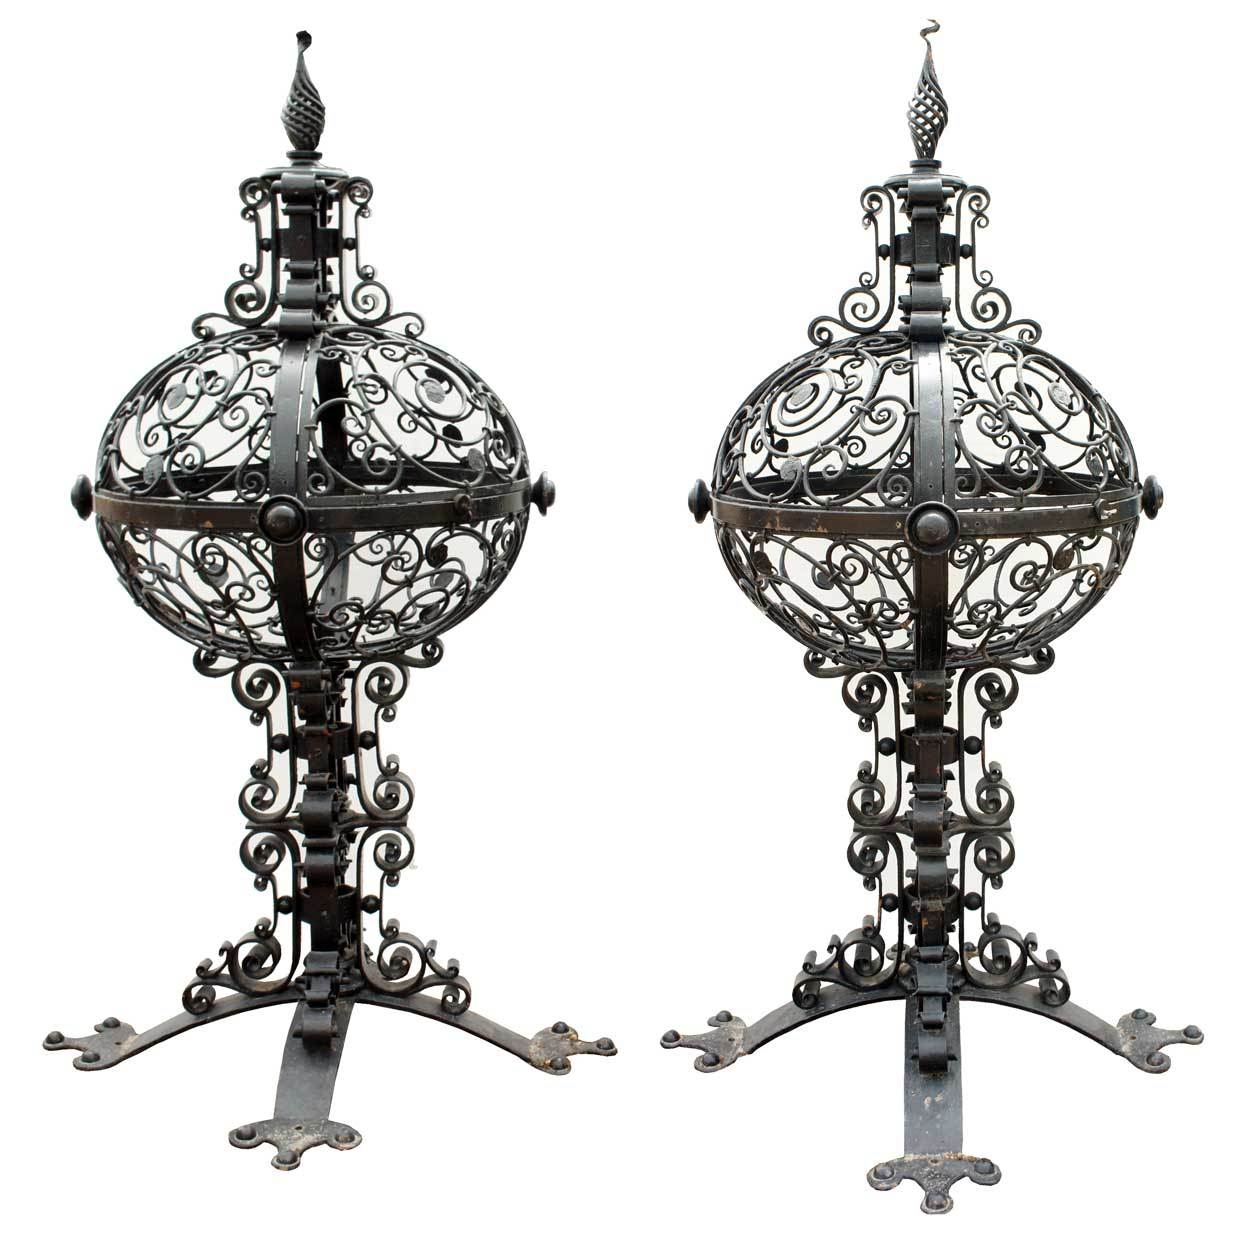 Pair of Large American Wrought Iron Gate Post Finials/Lanterns For Sale